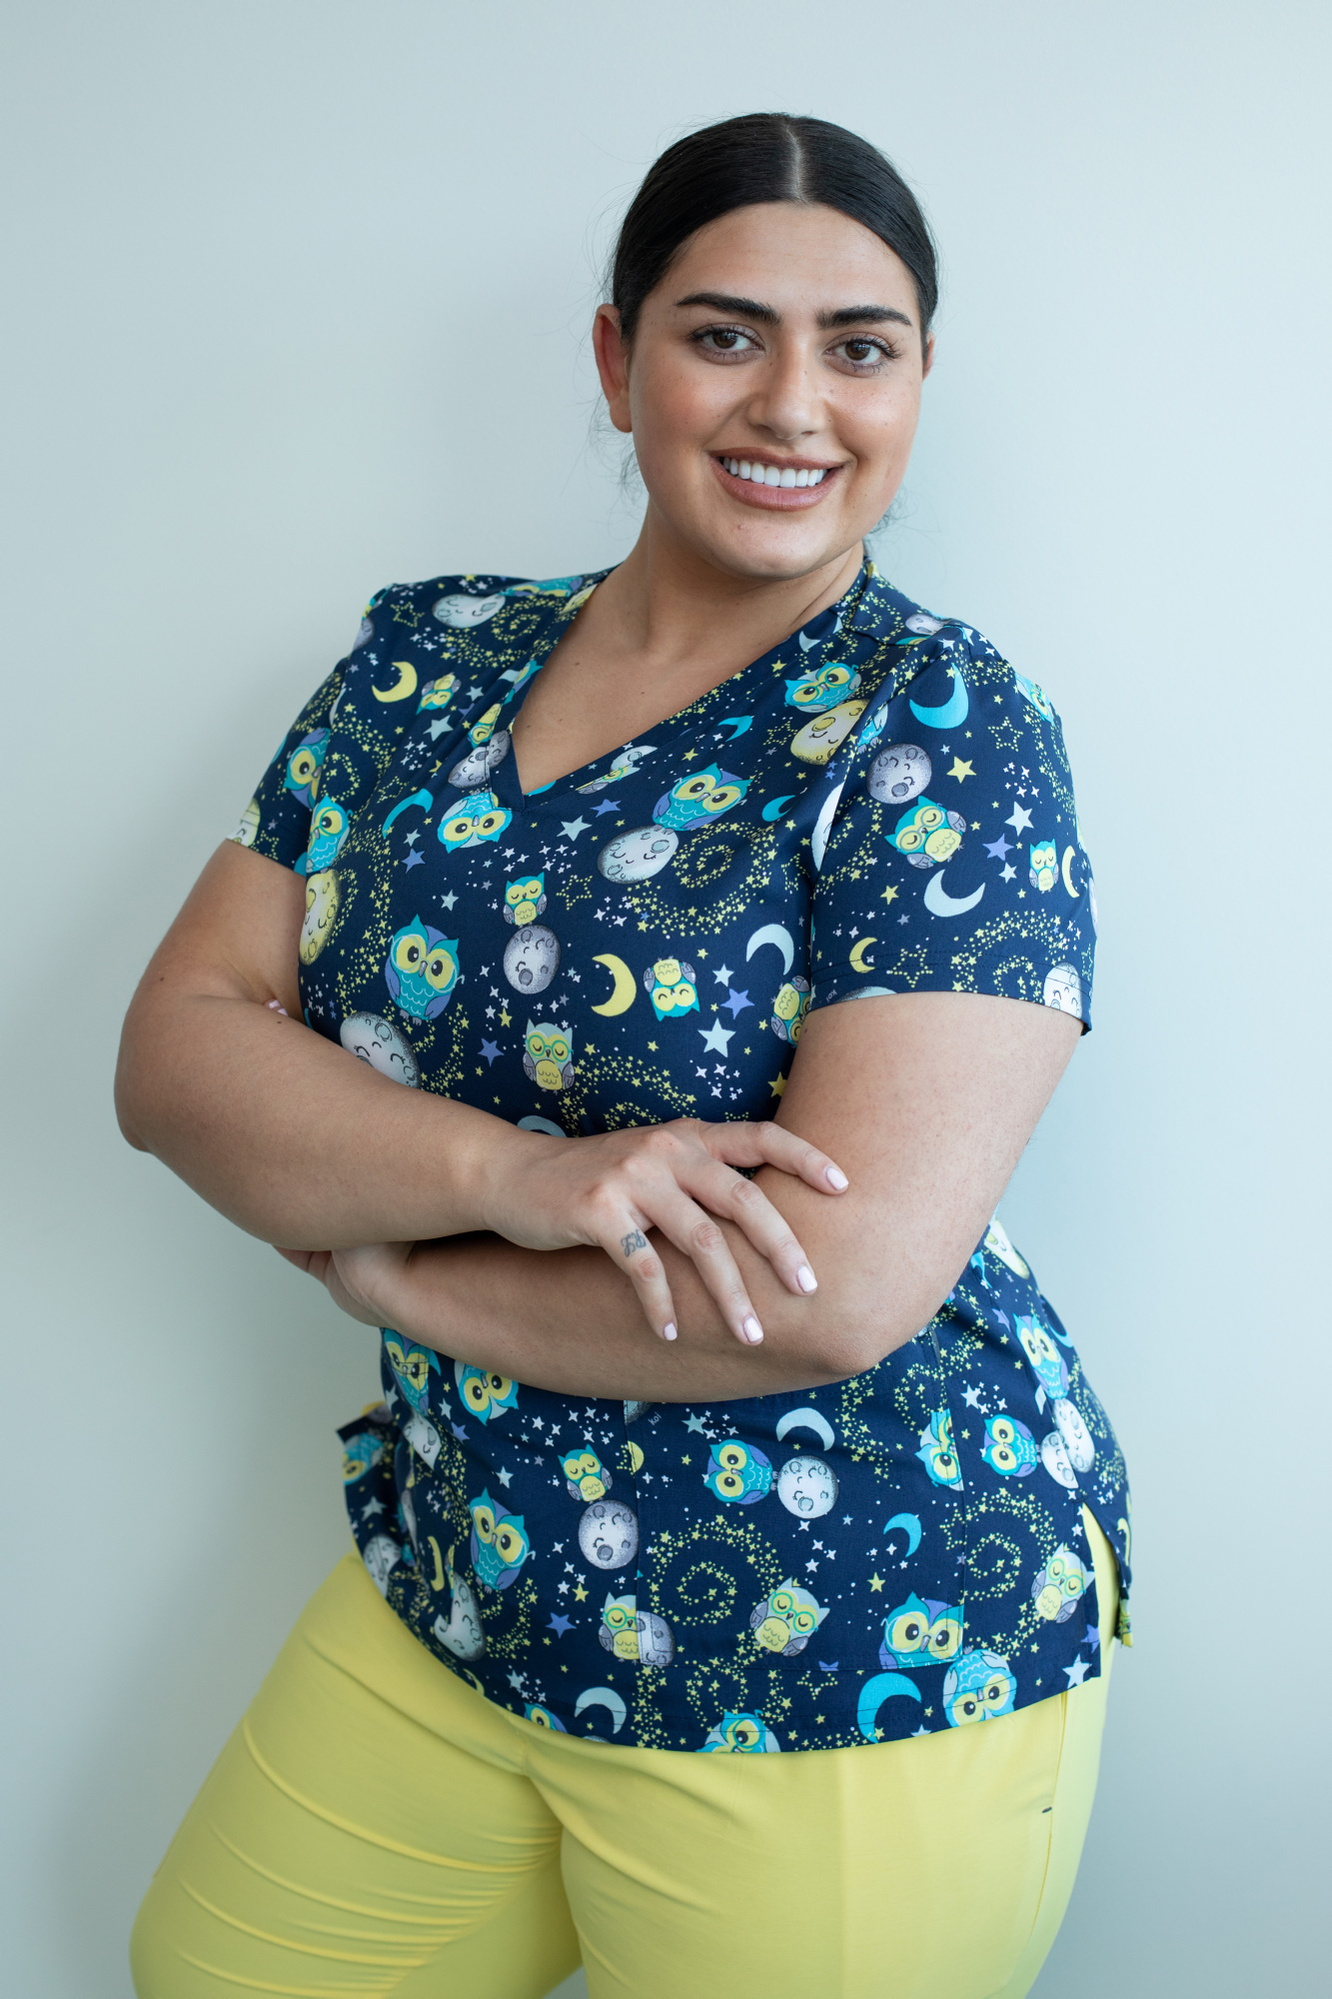 Happythreads Commercial Clothing Brand for Healthcare Professionals.  Lifestyle Photoshoot, model wears yellow scrubs and print top. Professional photographer Dublin 